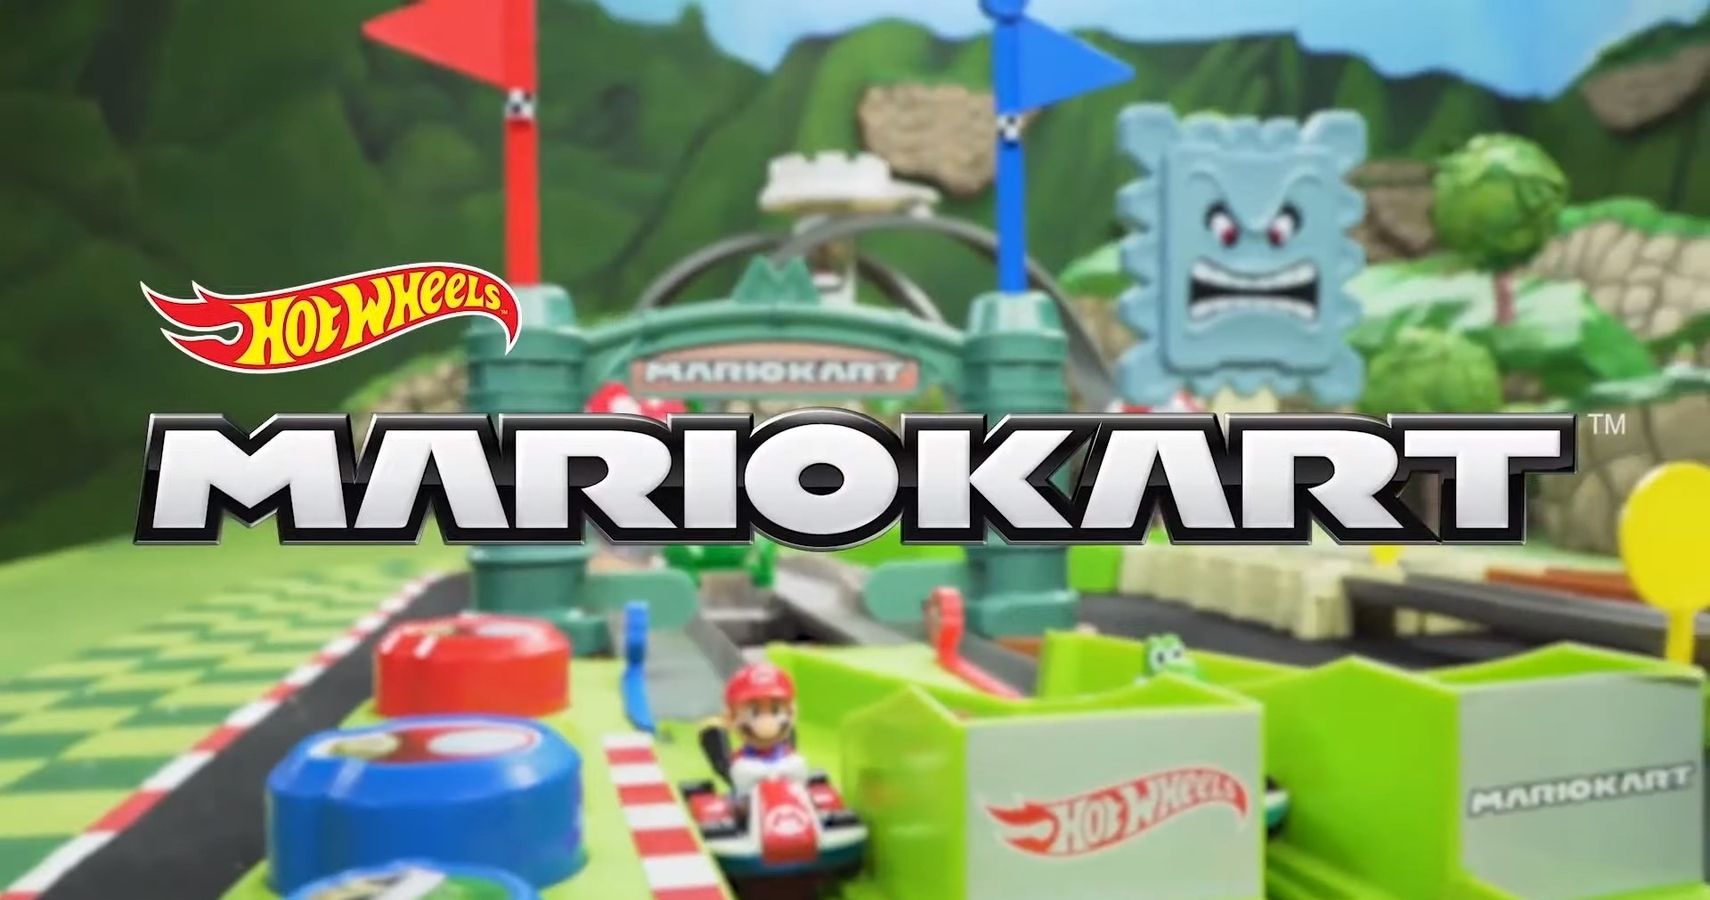 Mario Kart's Rainbow Road Hot Wheels Set Is Up For Preorder on Amazon